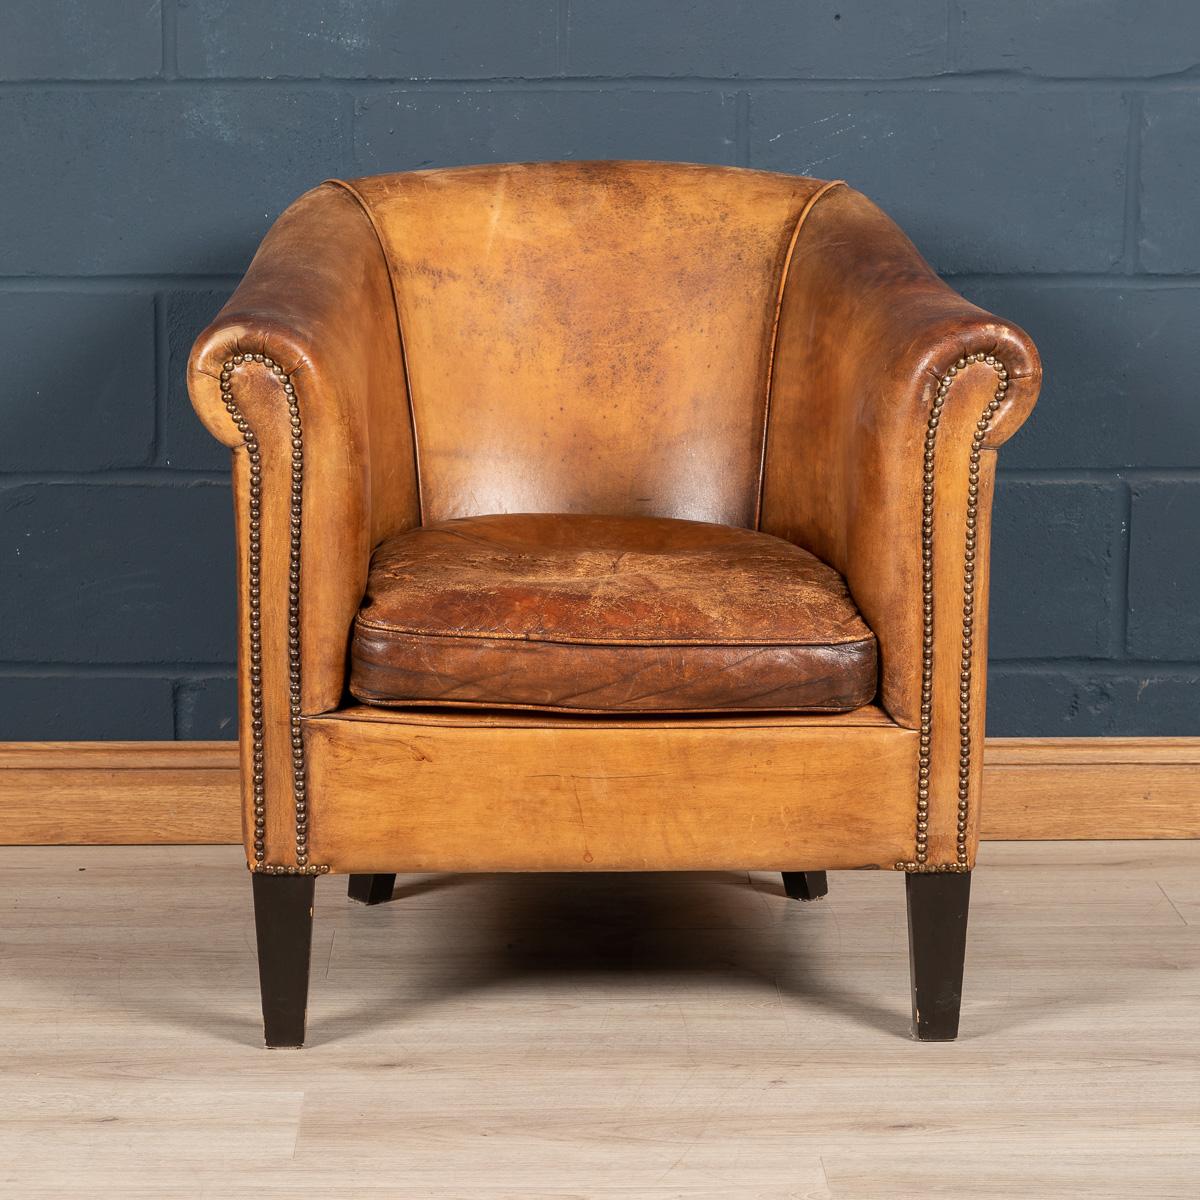 A charming tub chair, hand upholstered sheepskin leather by the finest craftsmen in Holland. Fantastic look for any interior, both modern and traditional.

Please note that our interior pieces are located at our Interior Design Showroom in